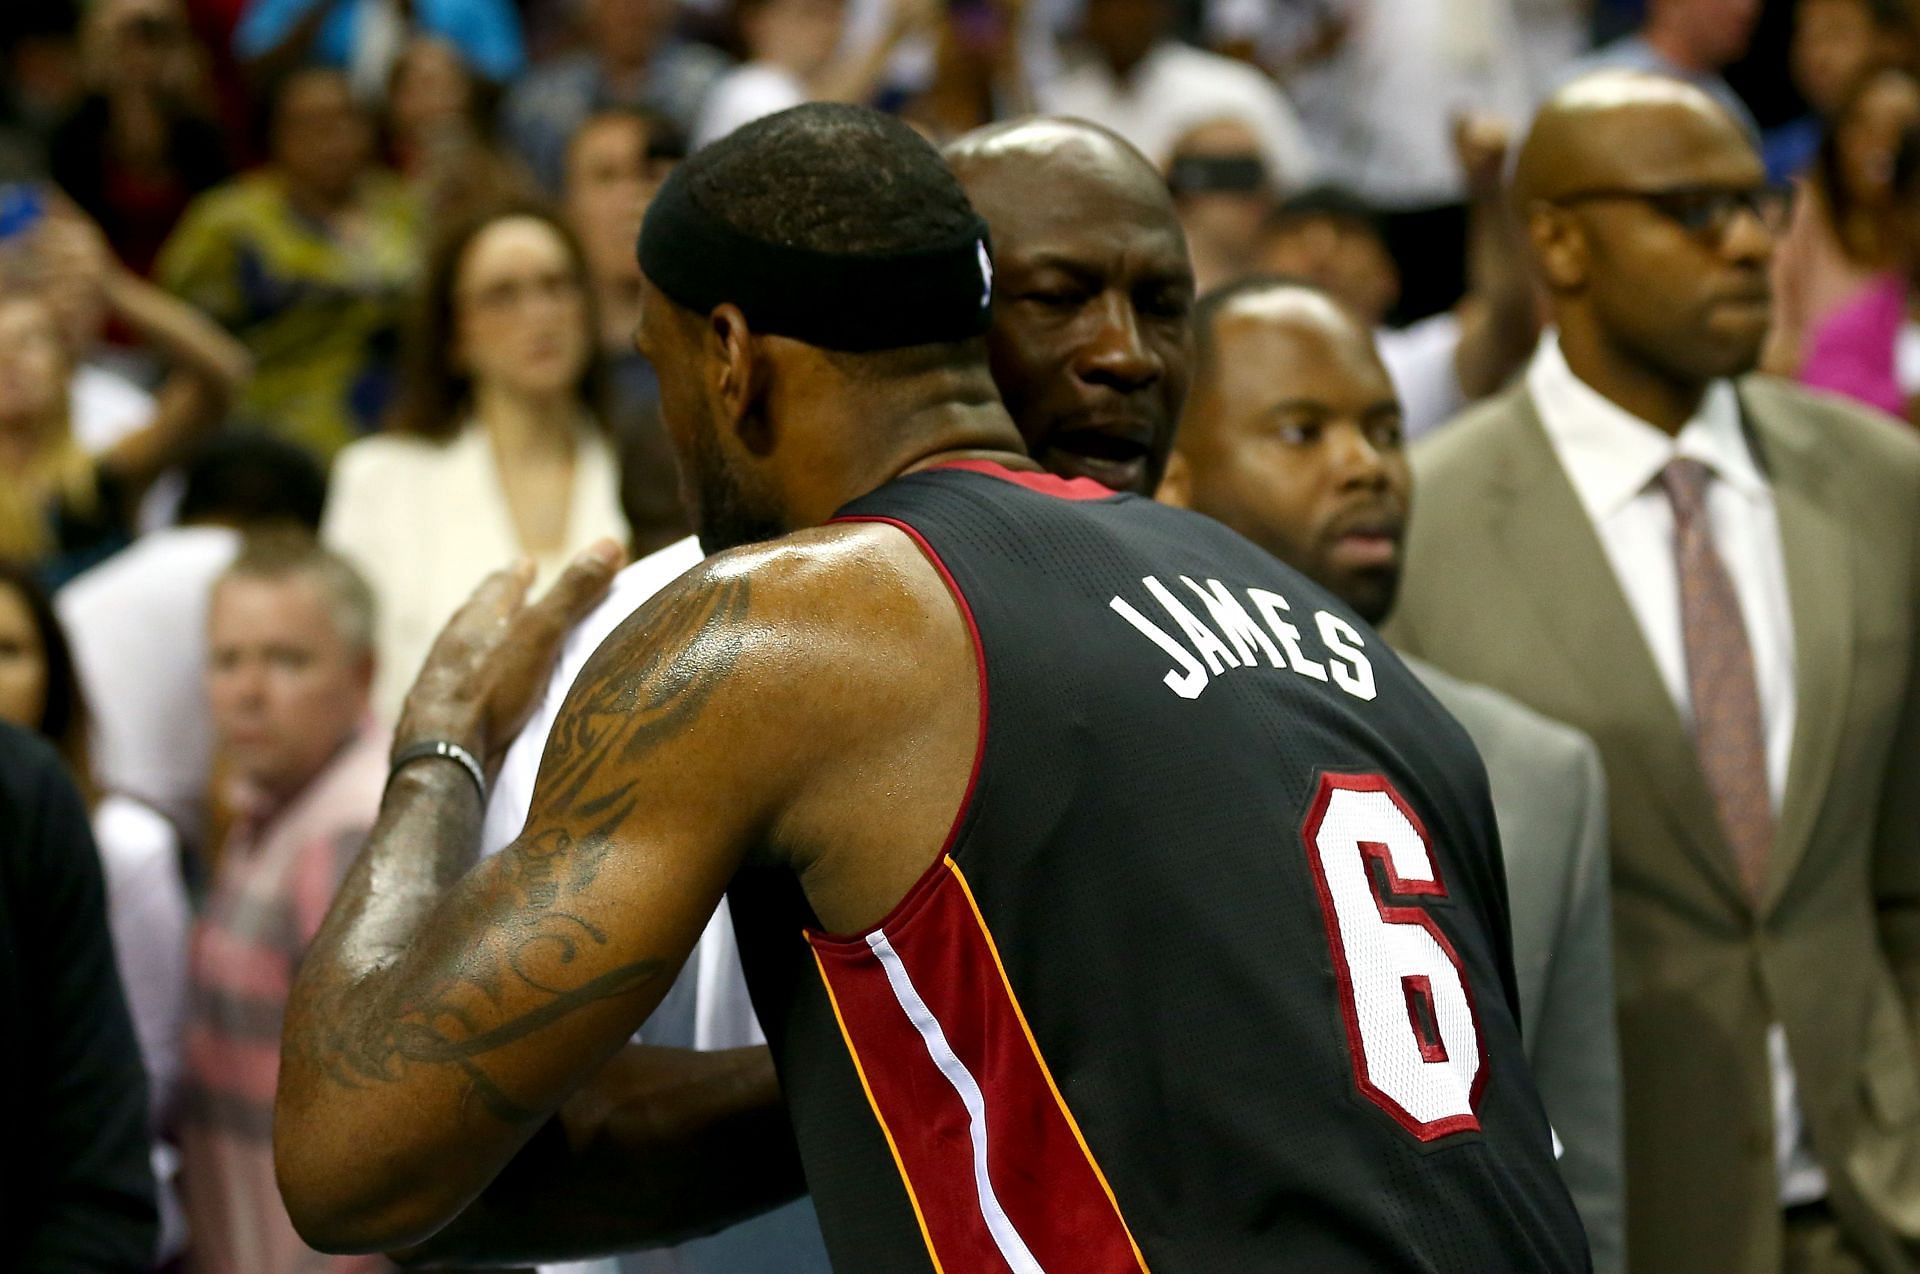 Michael Jordan and LeBron James in the 2014 NBA Playoffs